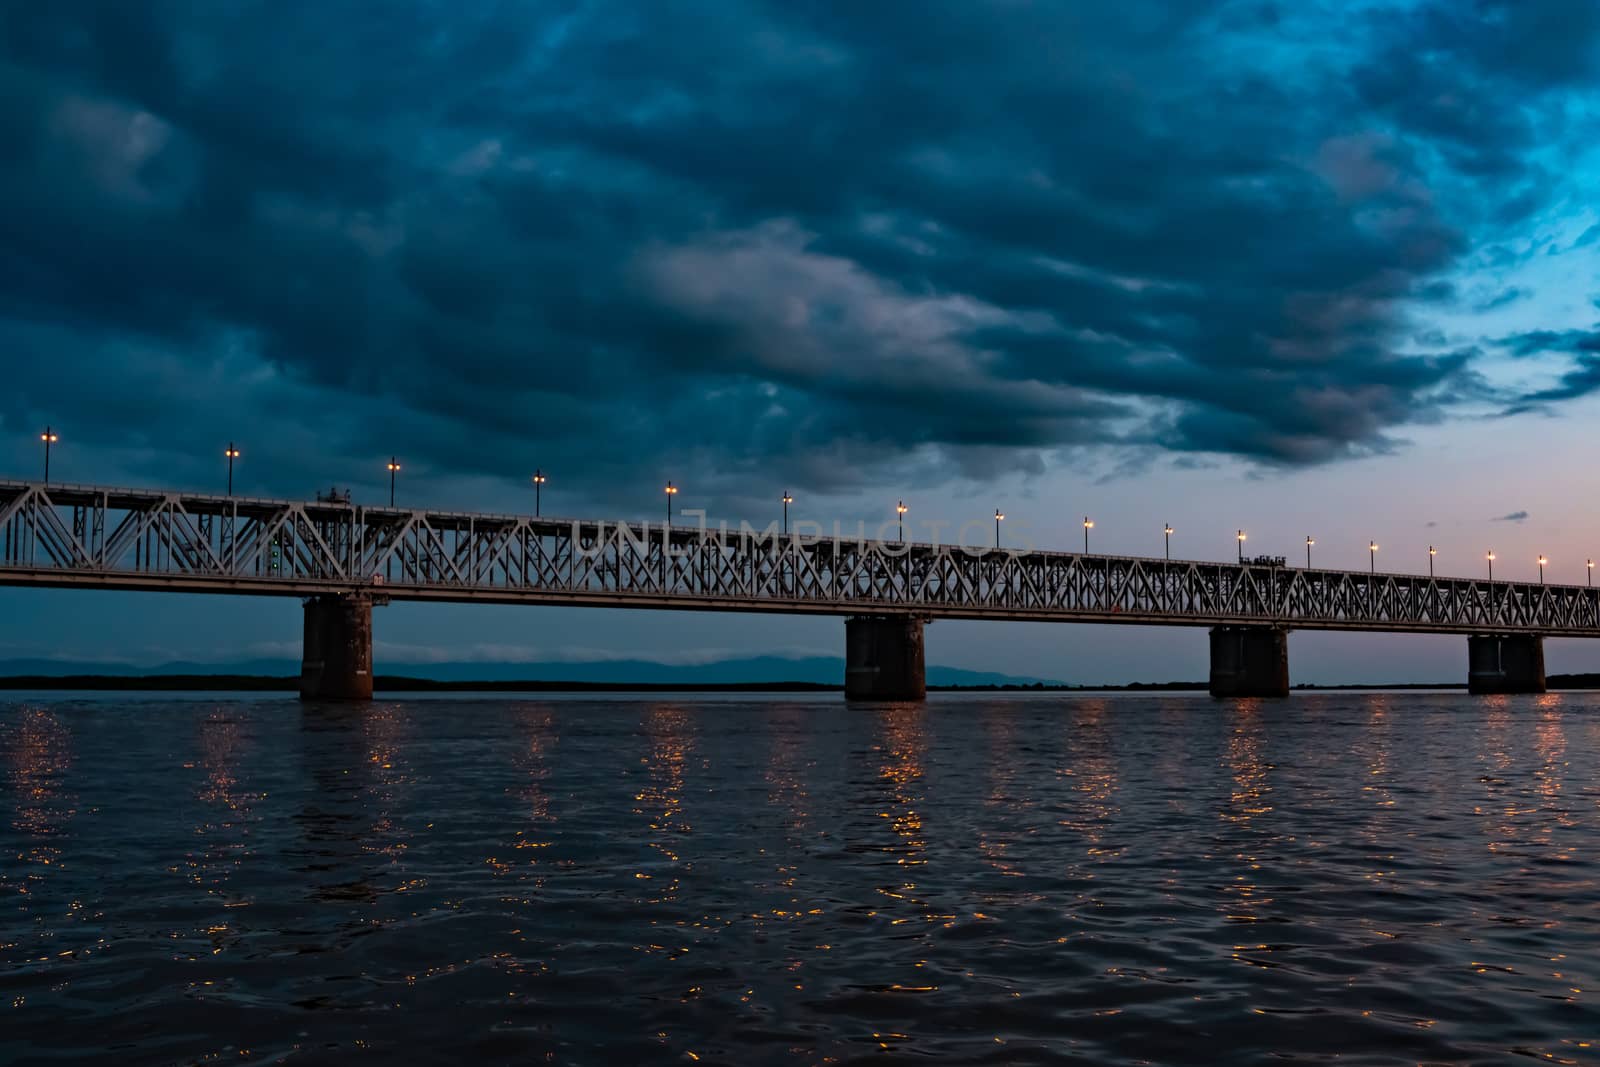 Bridge over the Amur river at sunset. Russia. Khabarovsk. Photo from the middle of the river